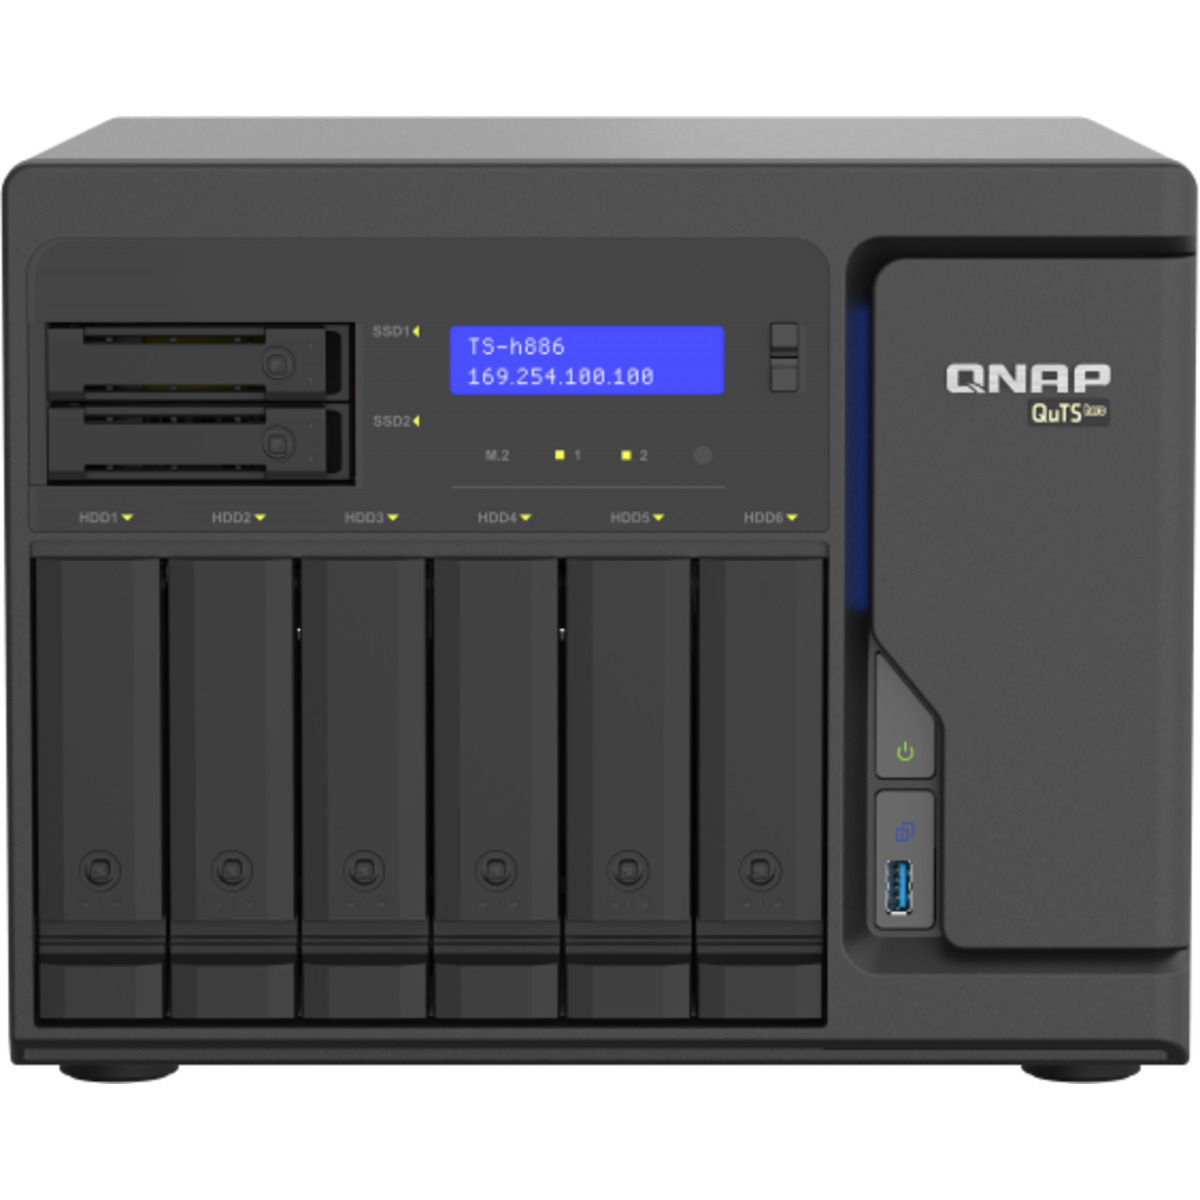 QNAP TS-h886 QuTS hero NAS 16tb 6+2-Bay Desktop Large Business / Enterprise NAS - Network Attached Storage Device 4x4tb Seagate IronWolf Pro ST4000NT001 3.5 7200rpm SATA 6Gb/s HDD NAS Class Drives Installed - Burn-In Tested TS-h886 QuTS hero NAS